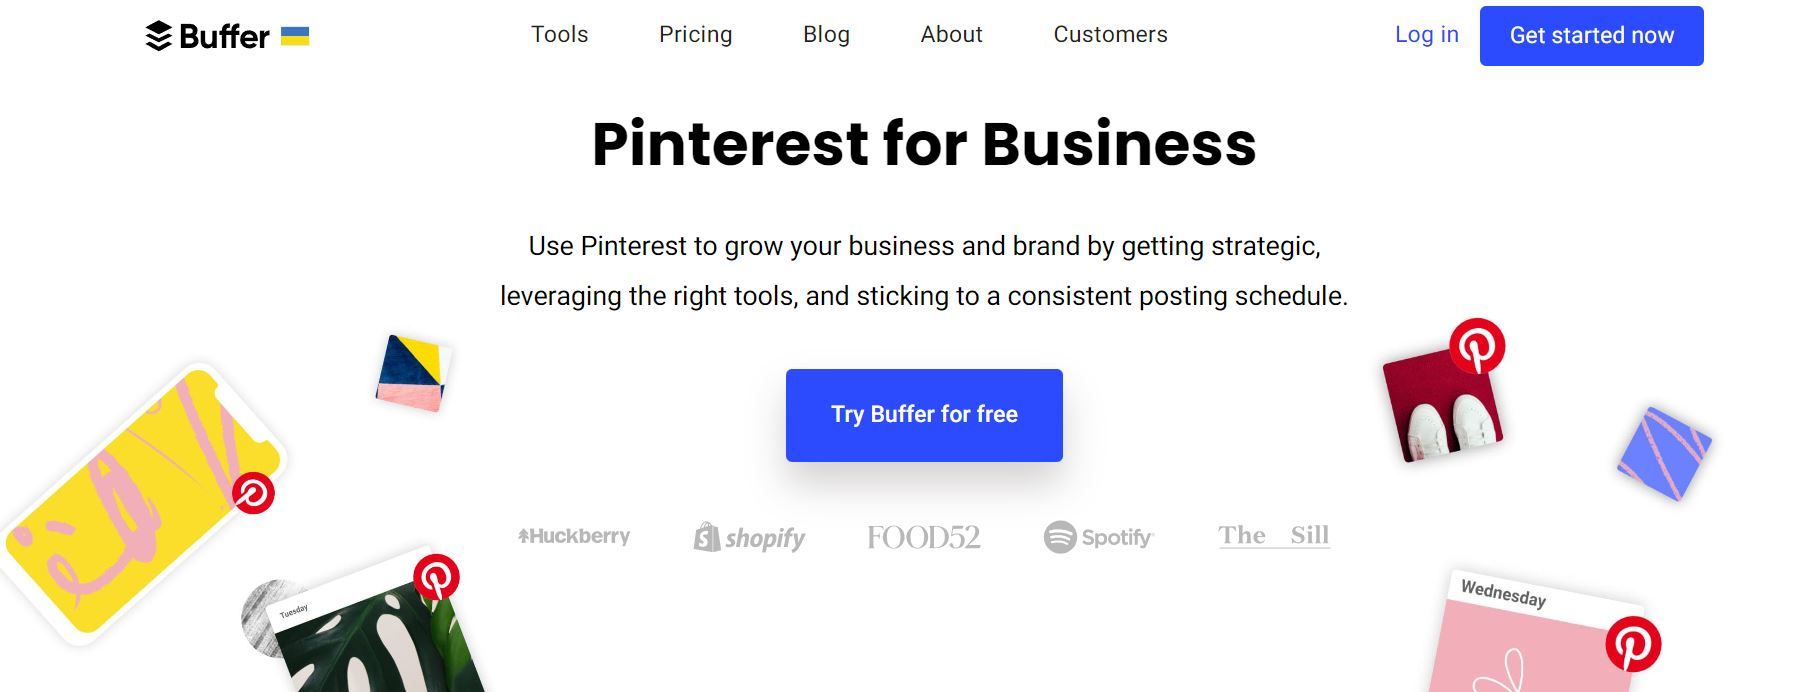 Buffer Pinterest tool helps schedule your pins and grow your brand